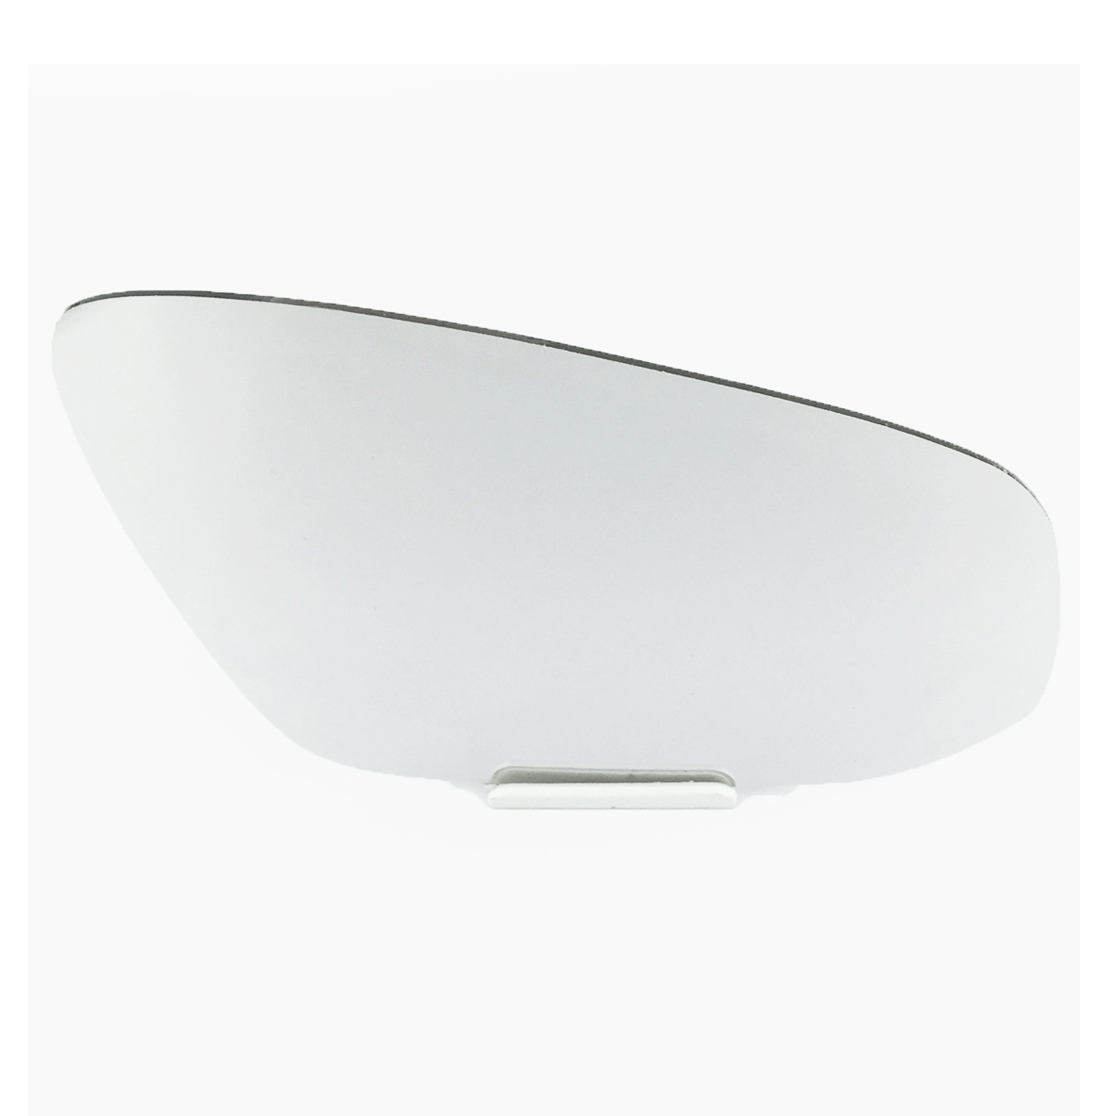 Toyota Rav 4 Wing Mirror Glass RIGHT HAND ( UK Driver Side ) 2013 to 2020 – Convex Wing Mirror